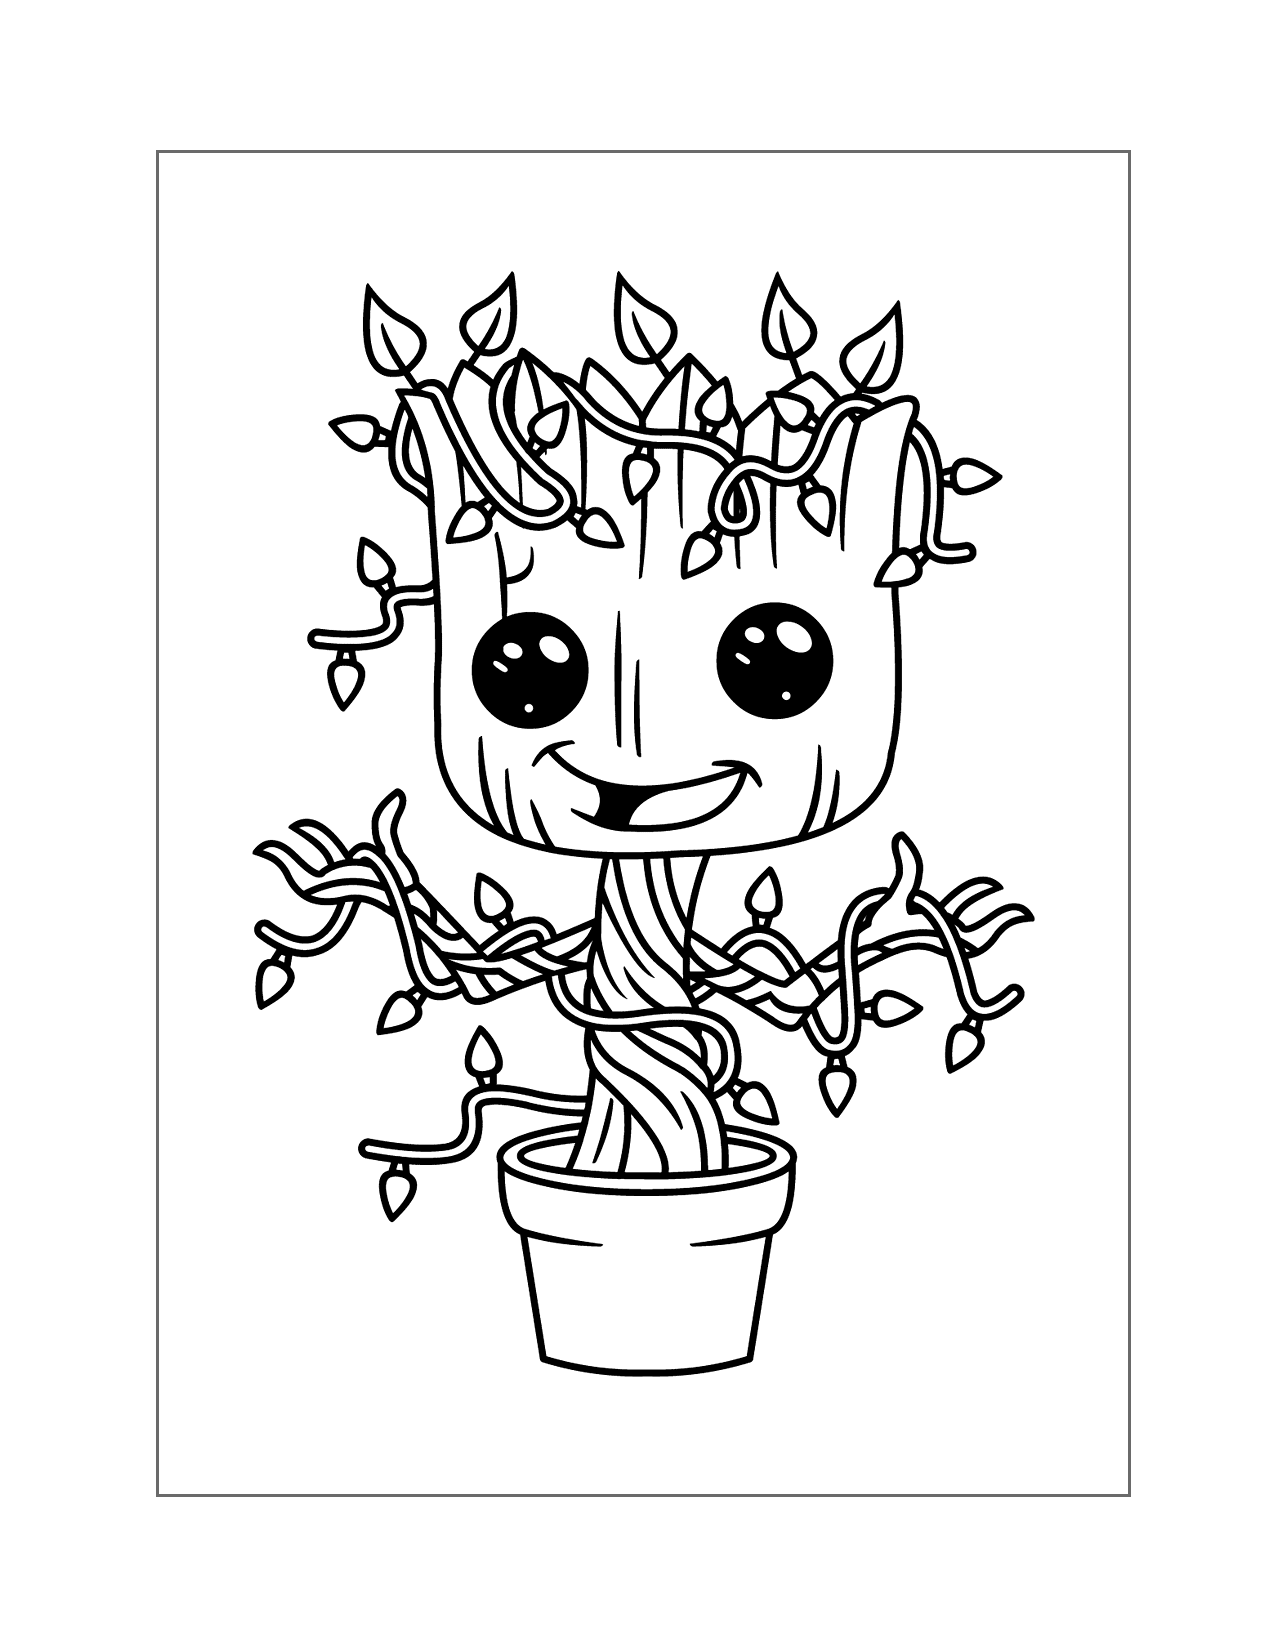 Sapling Groot Coloring Page